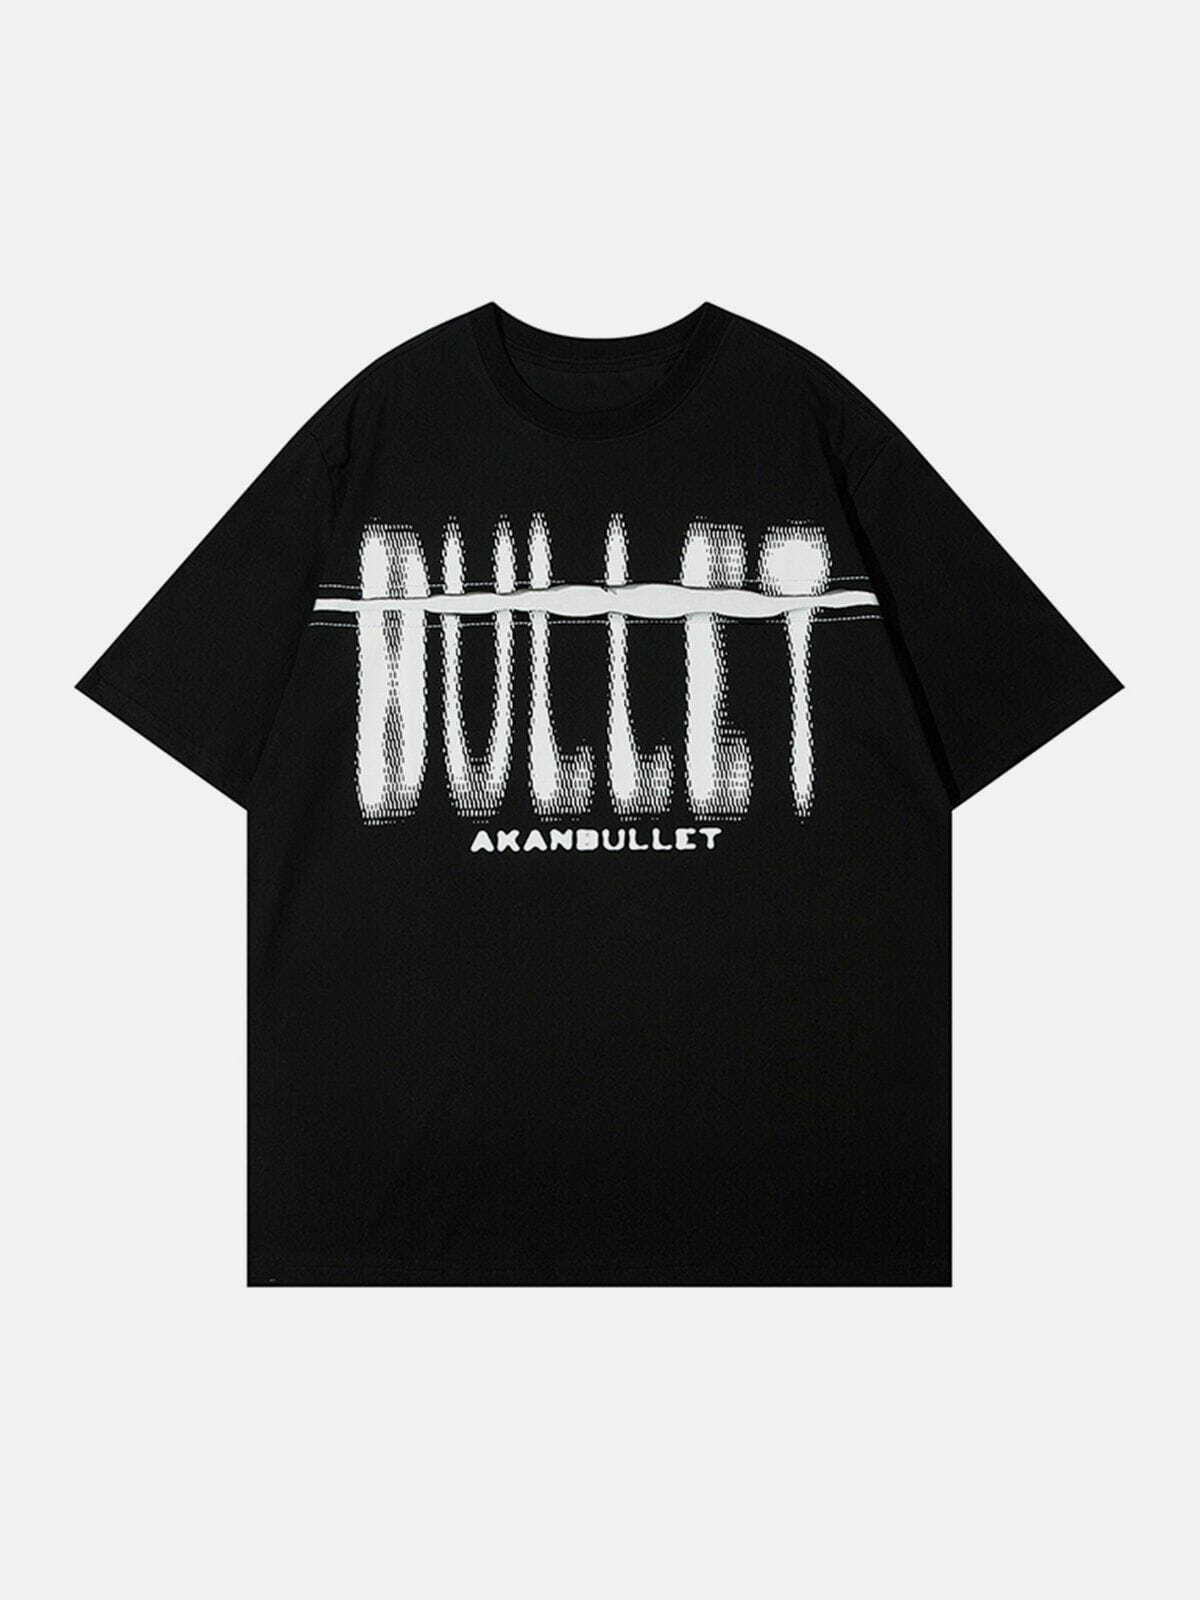 cut bullet graphic tee edgy streetwear statement 4314